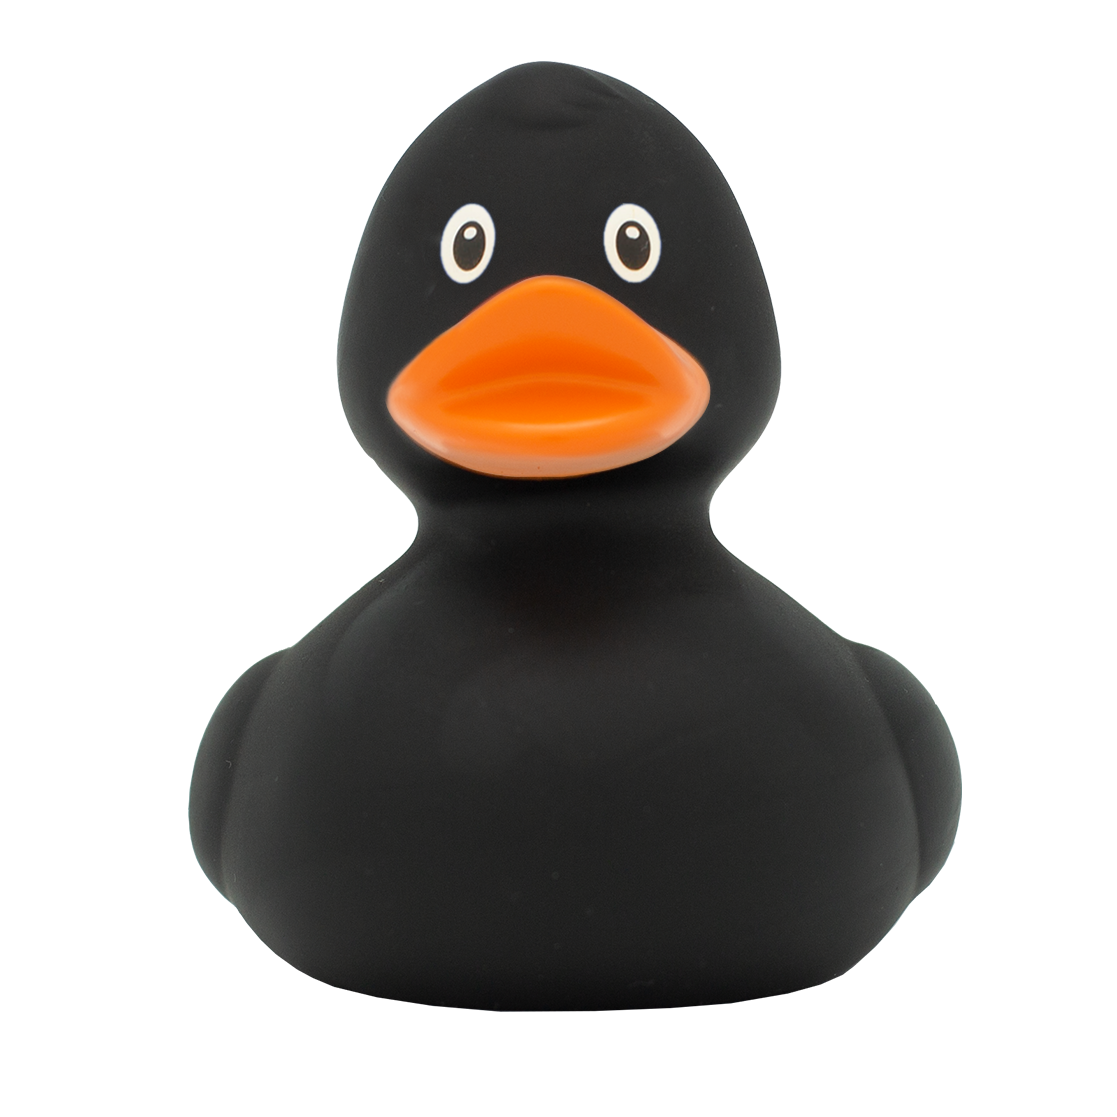 LILALU - SHARE HAPPINESS - Black rubber duck